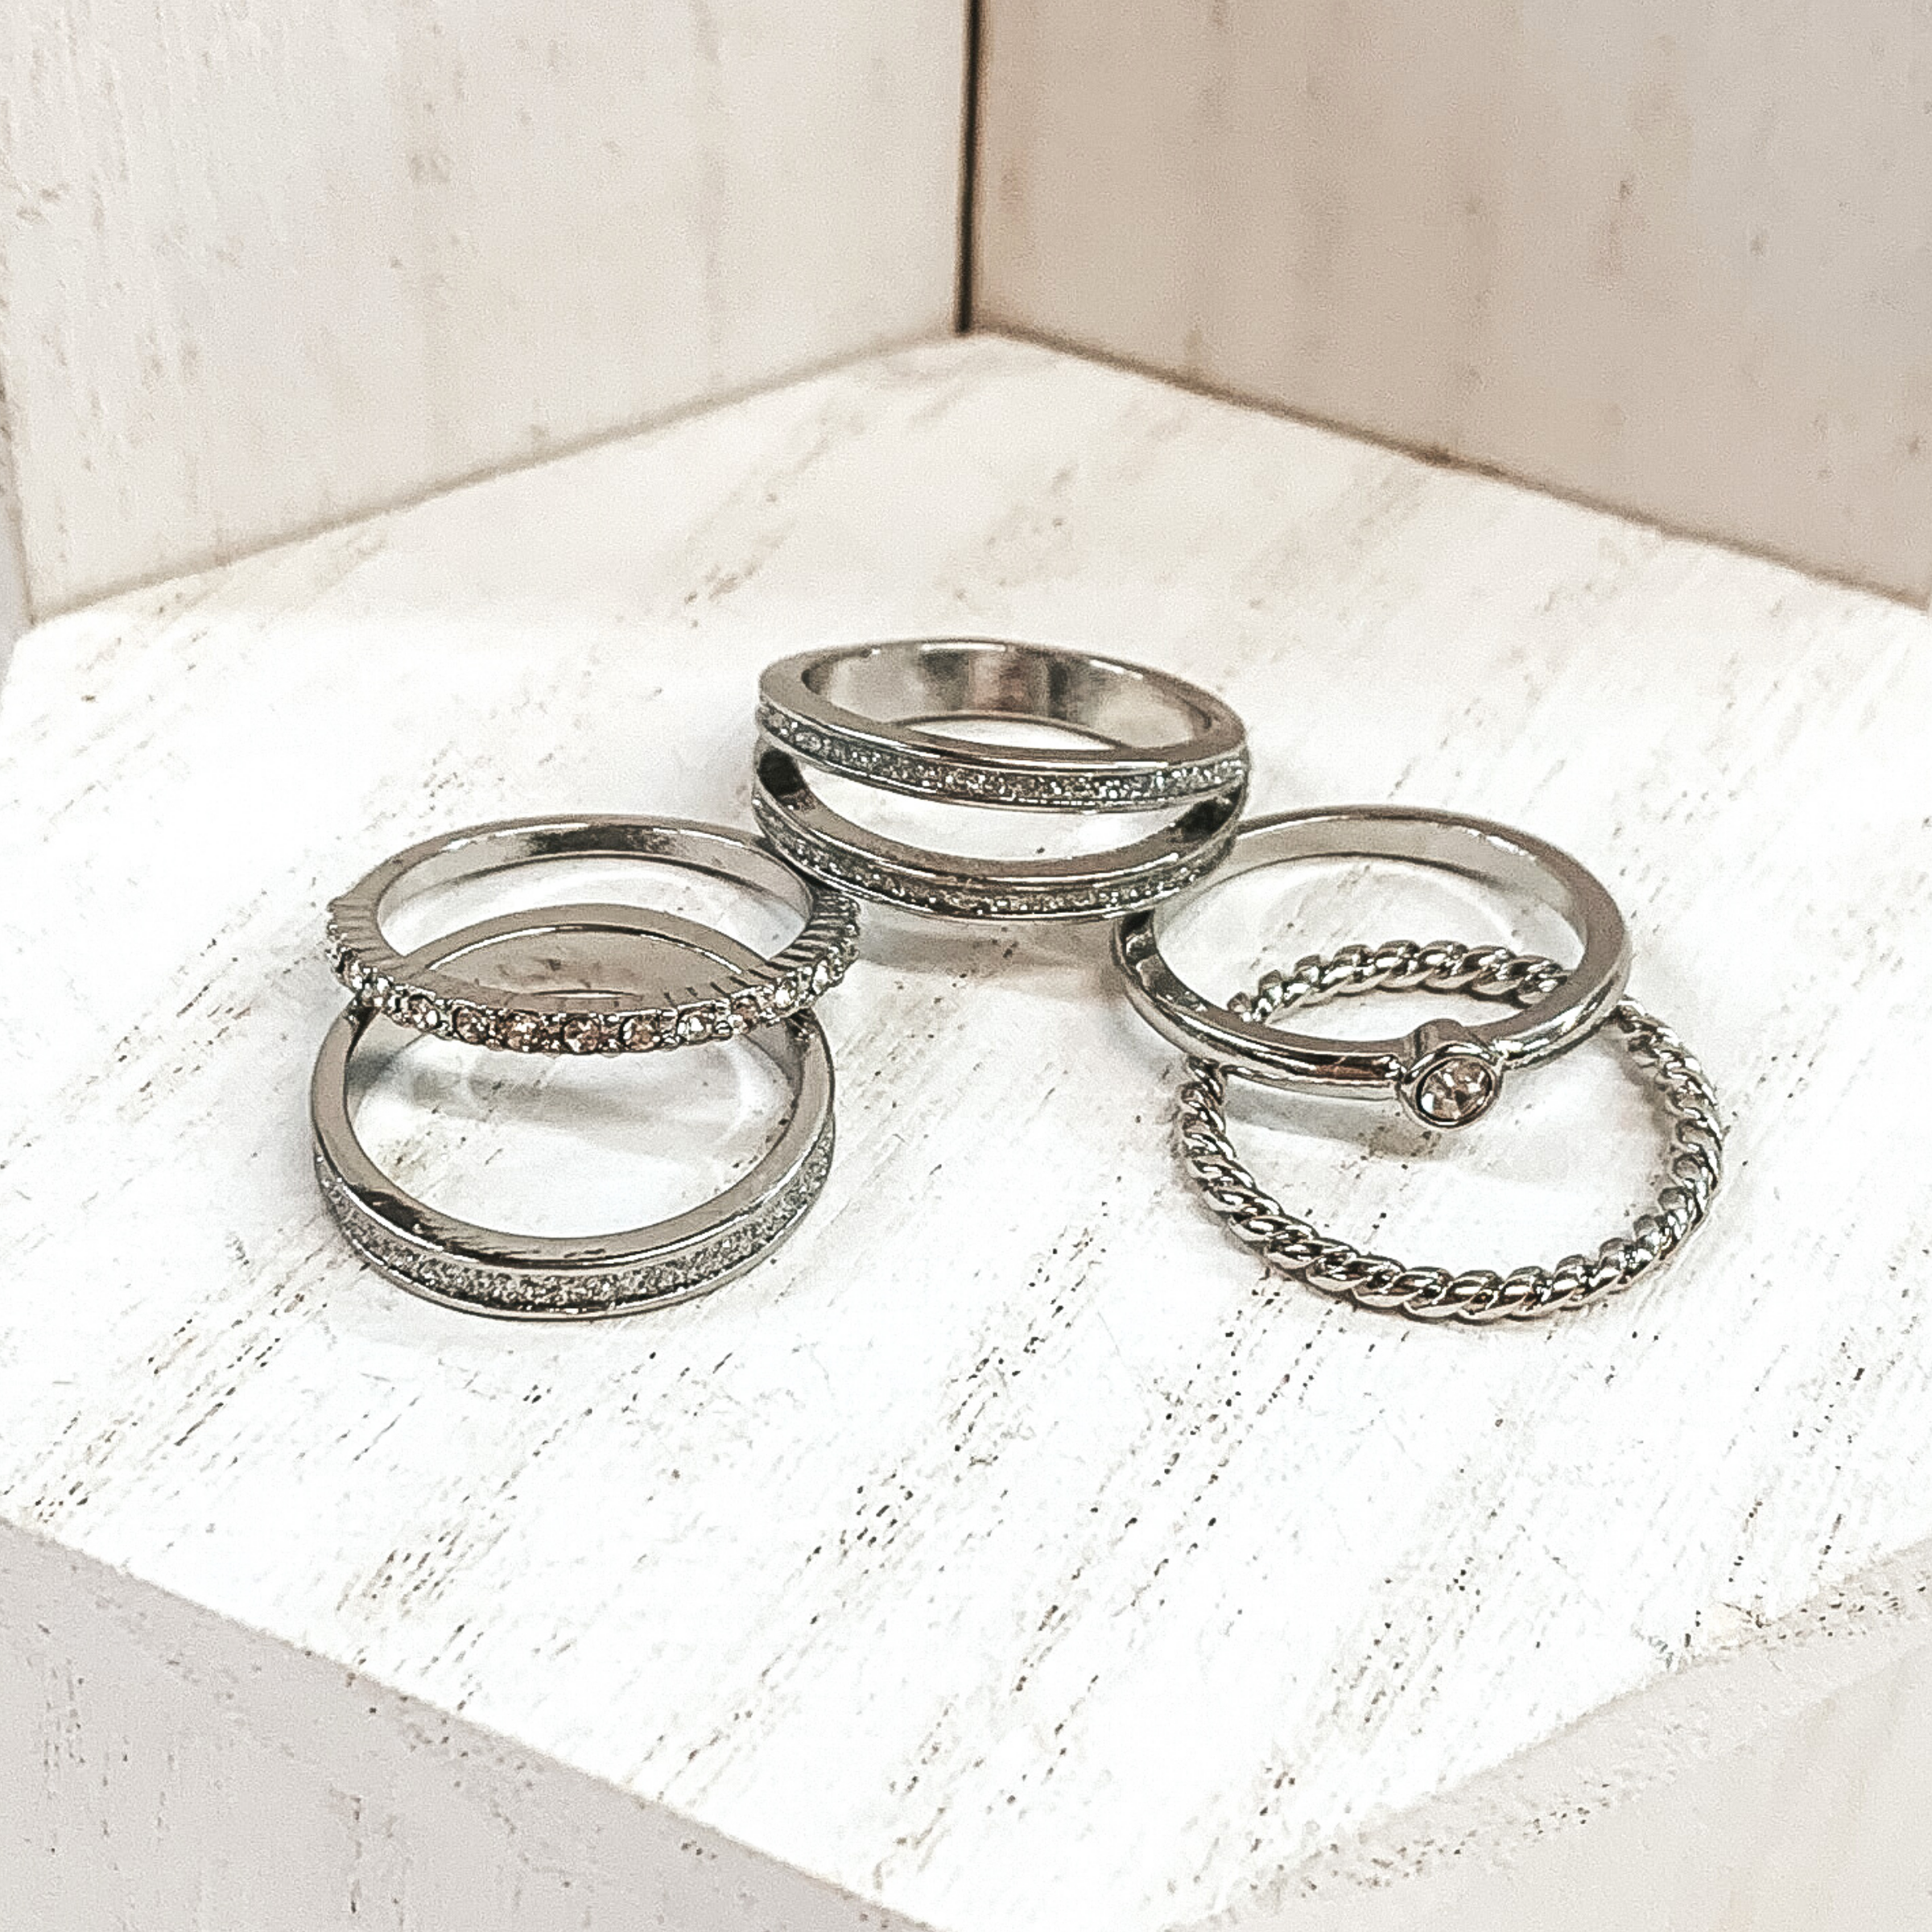 This is a set of five silver rings. All of them but one ring has crystals in different varieties on them. The single ring that does not have crystals is a twisted ring. These rings are pictured on a white background.